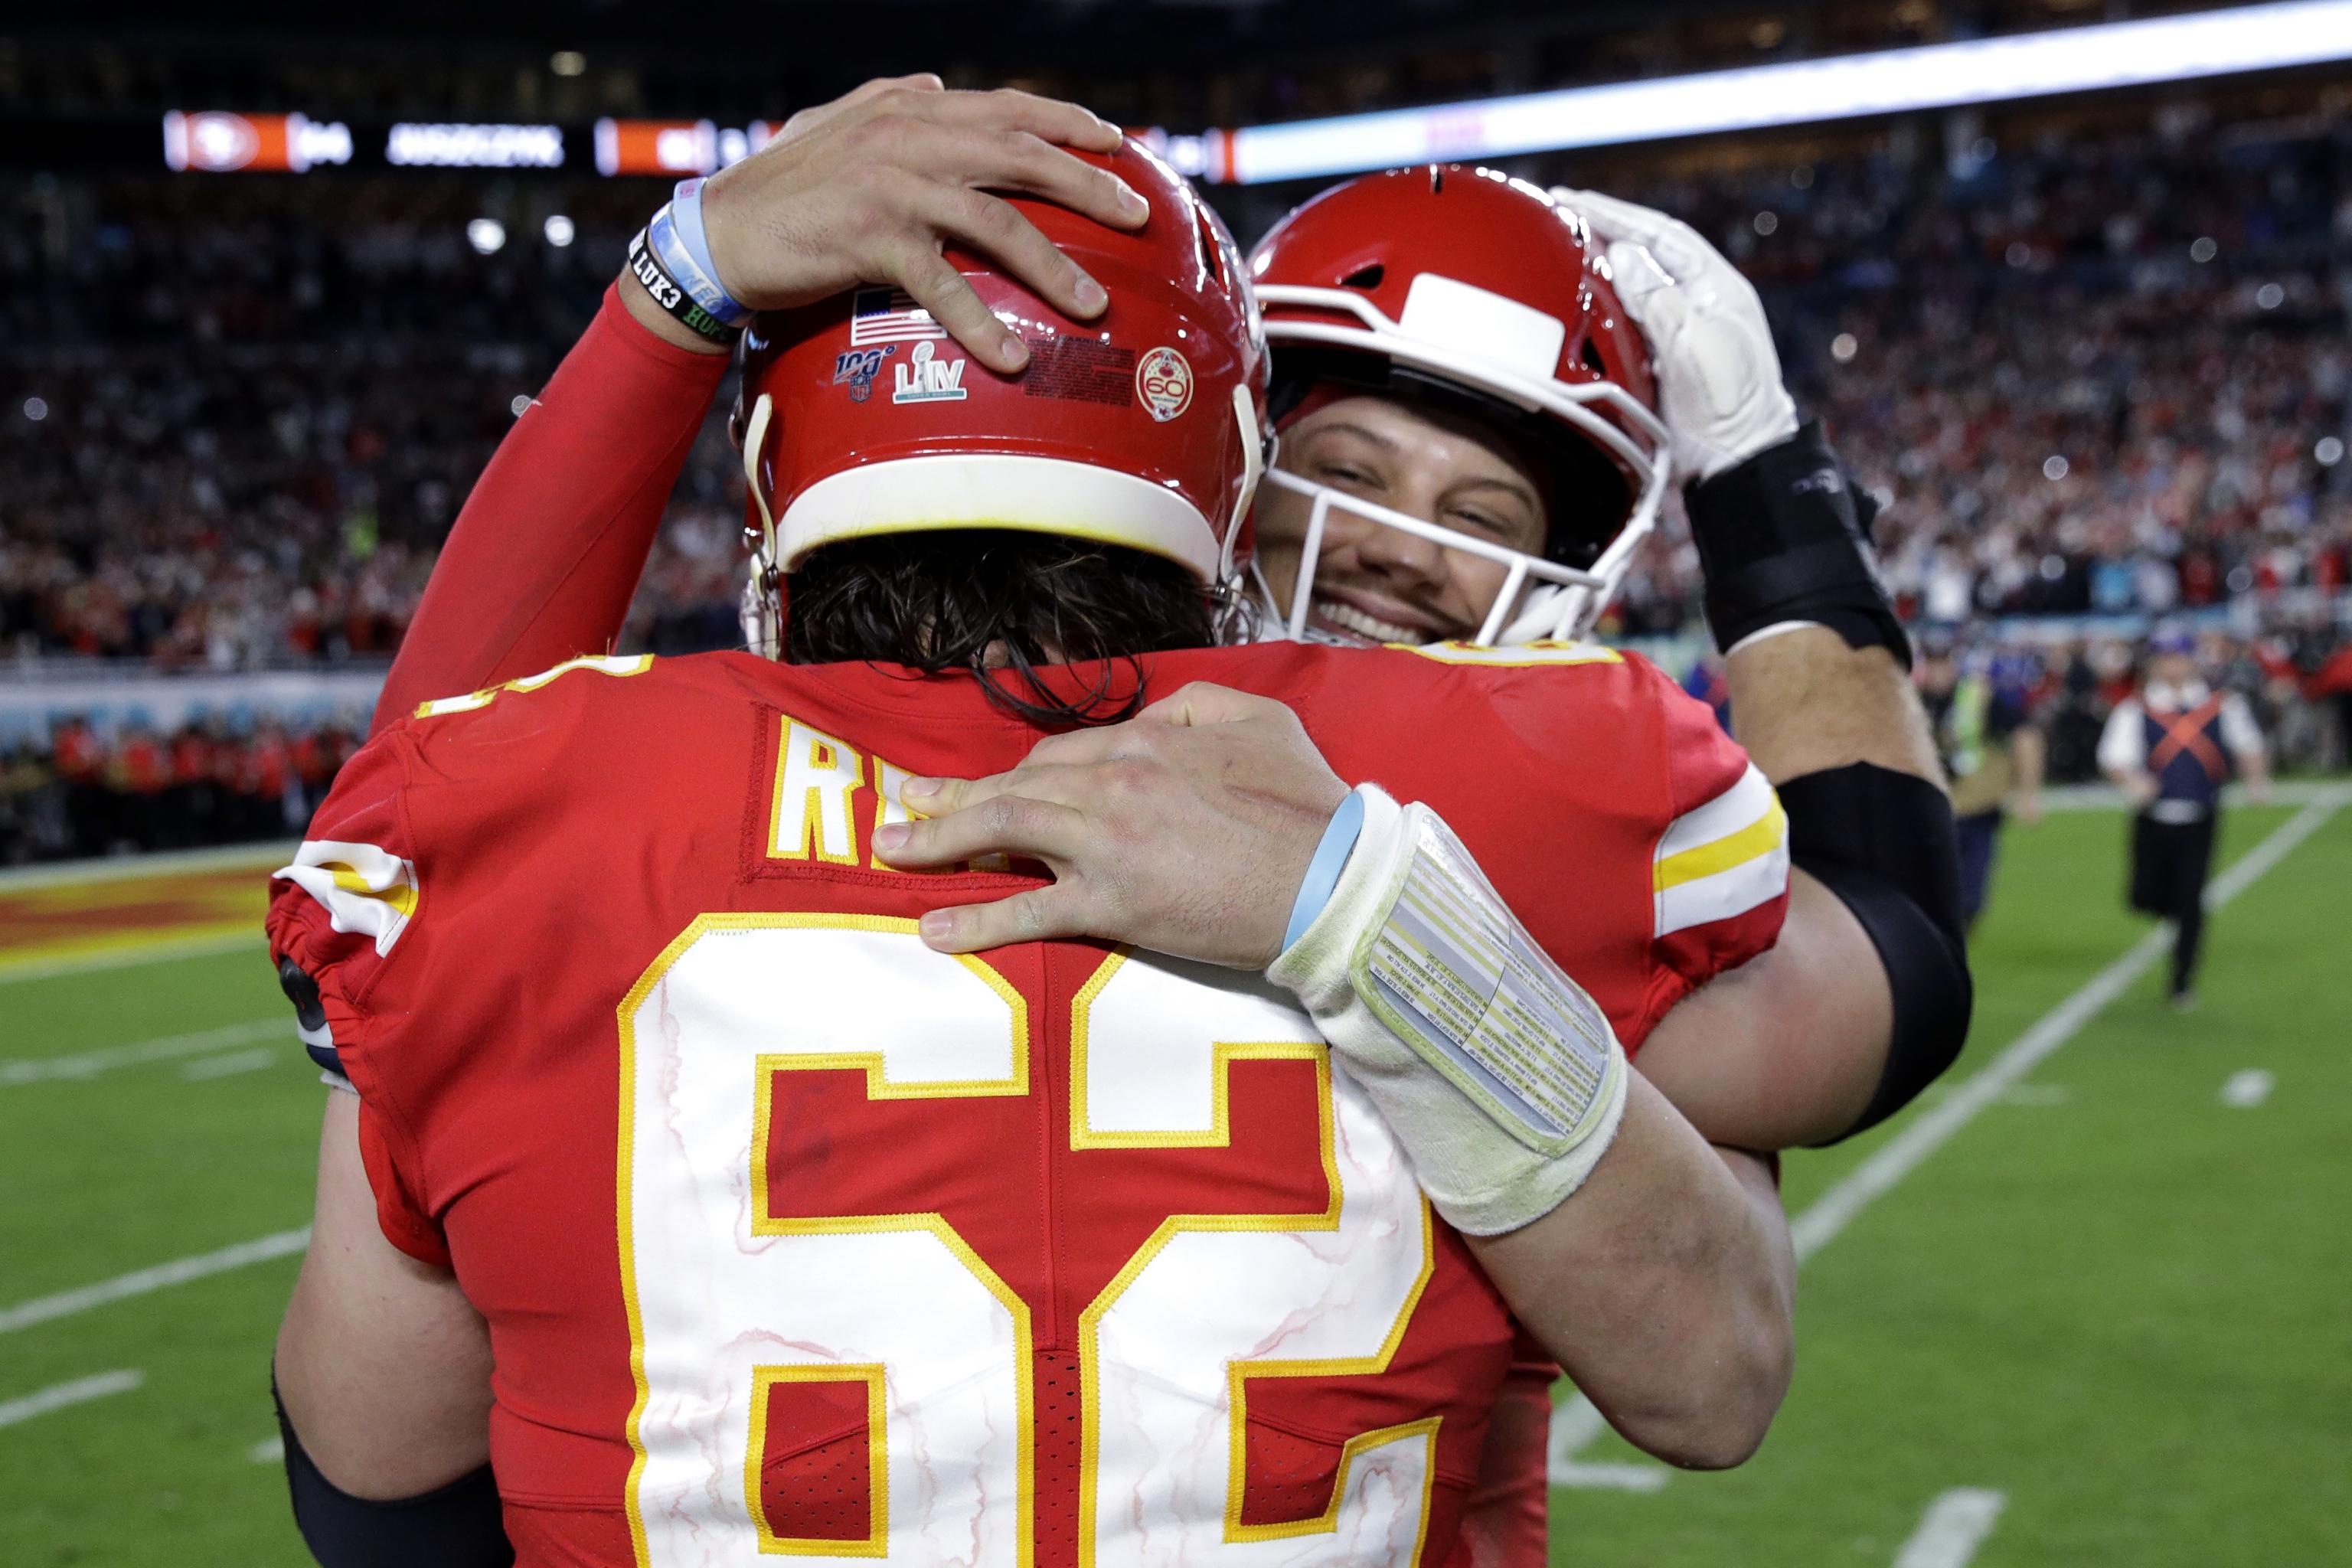 The Kansas City Chiefs Waited 50 Years for This Super Bowl Date